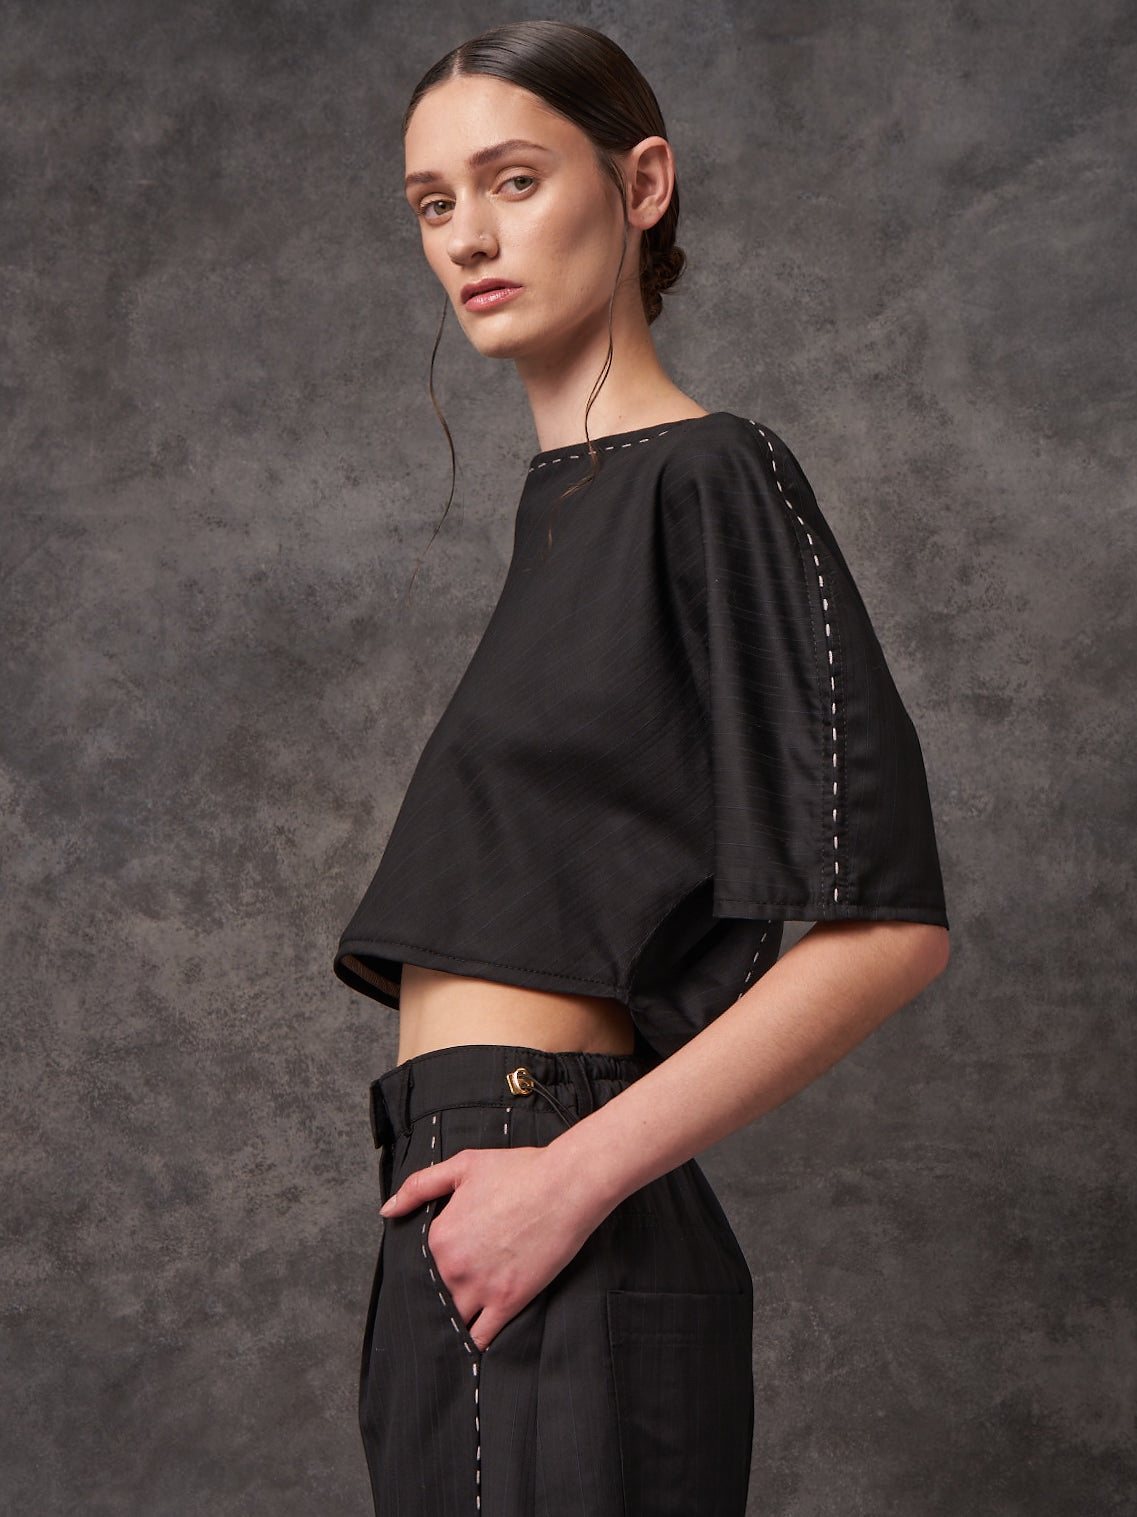 Hand-embroidered Sculpted Top